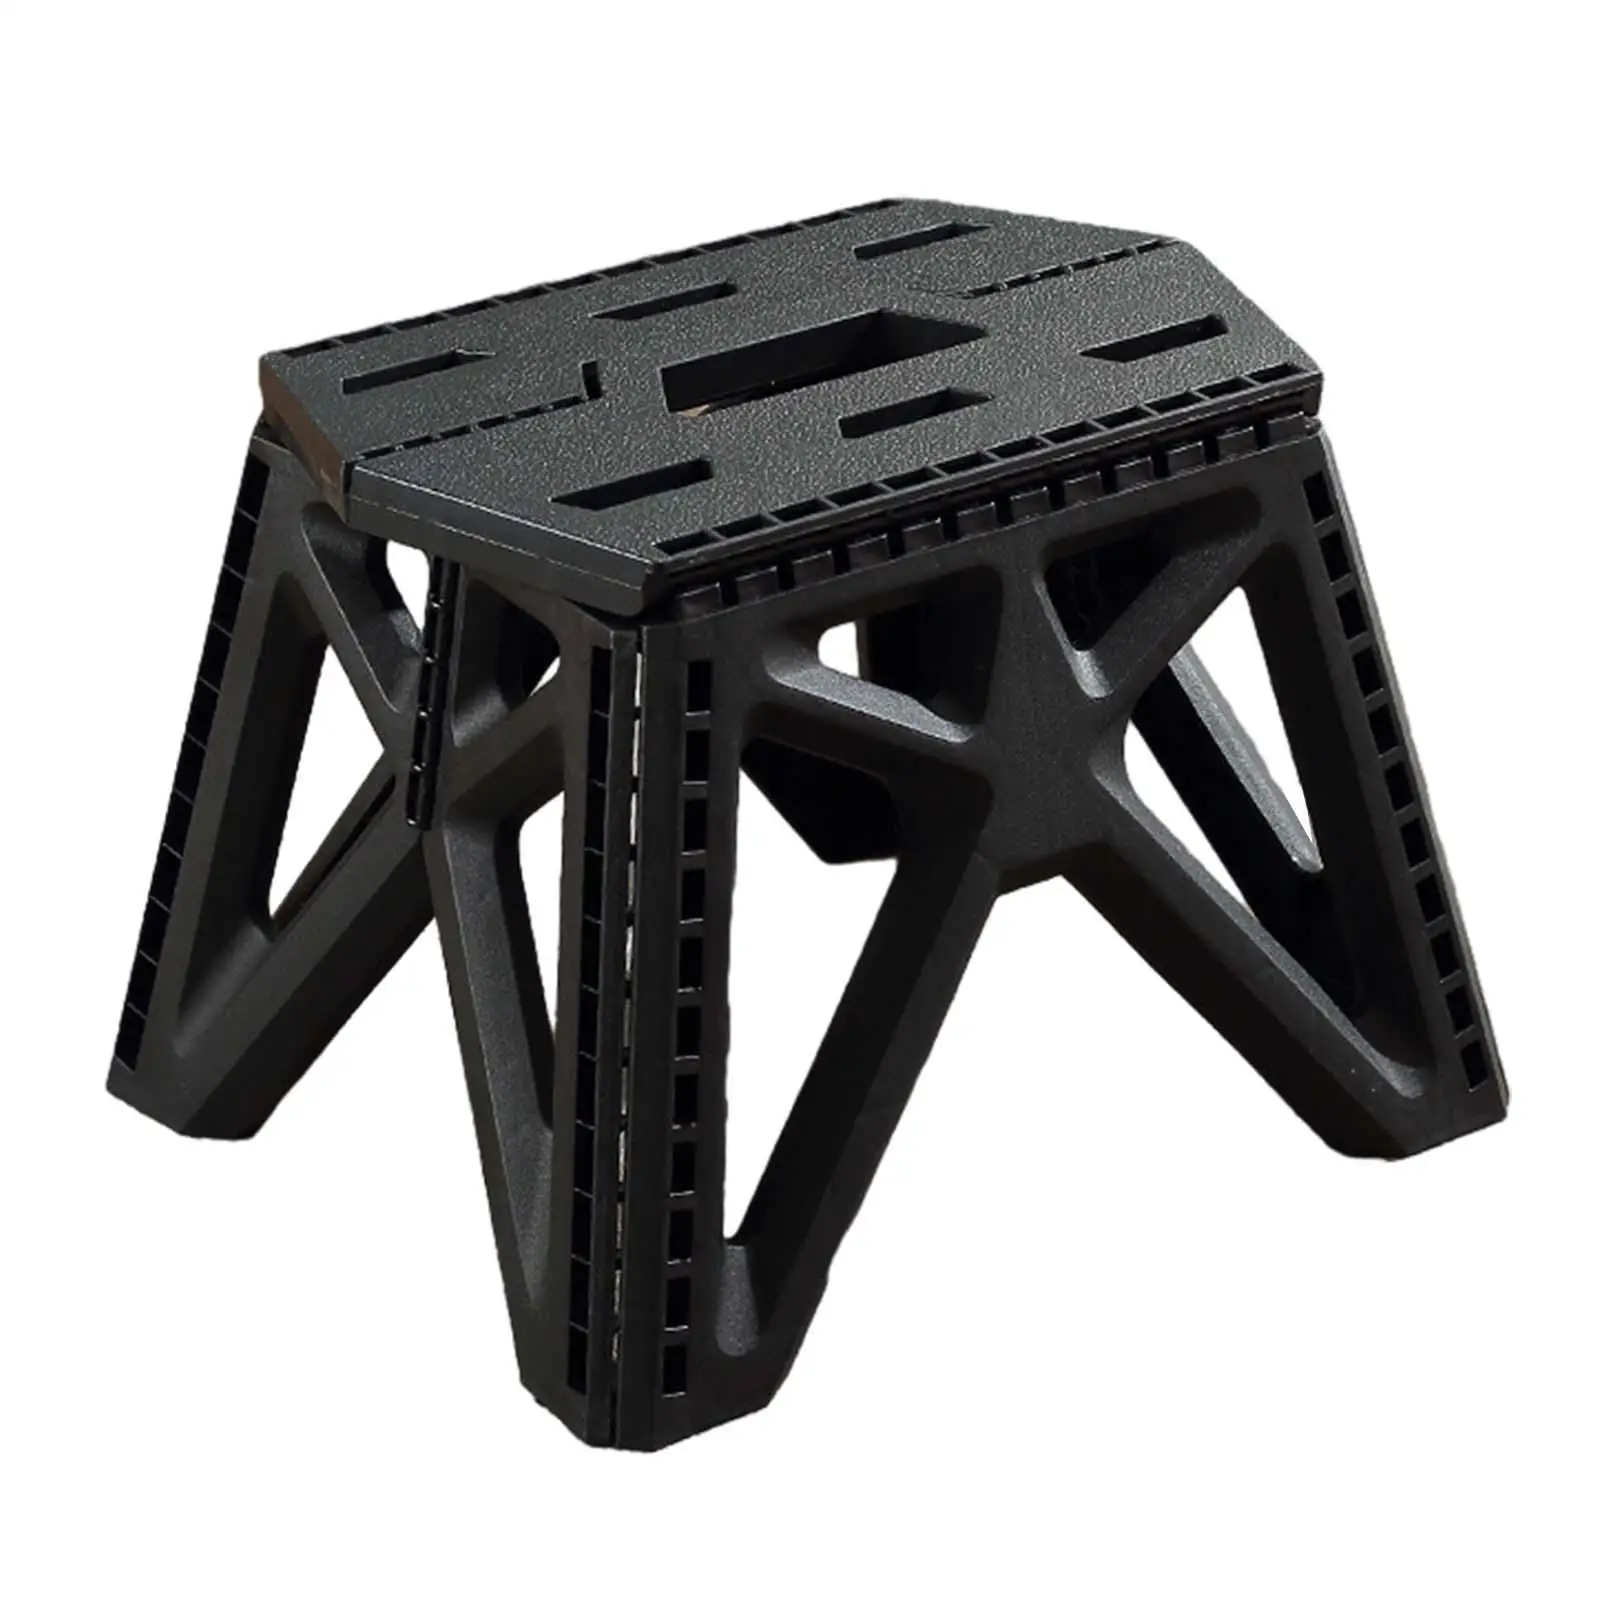 Foldable Camping Stool Lightweight Camping Chair for Travel Backpacking Yard